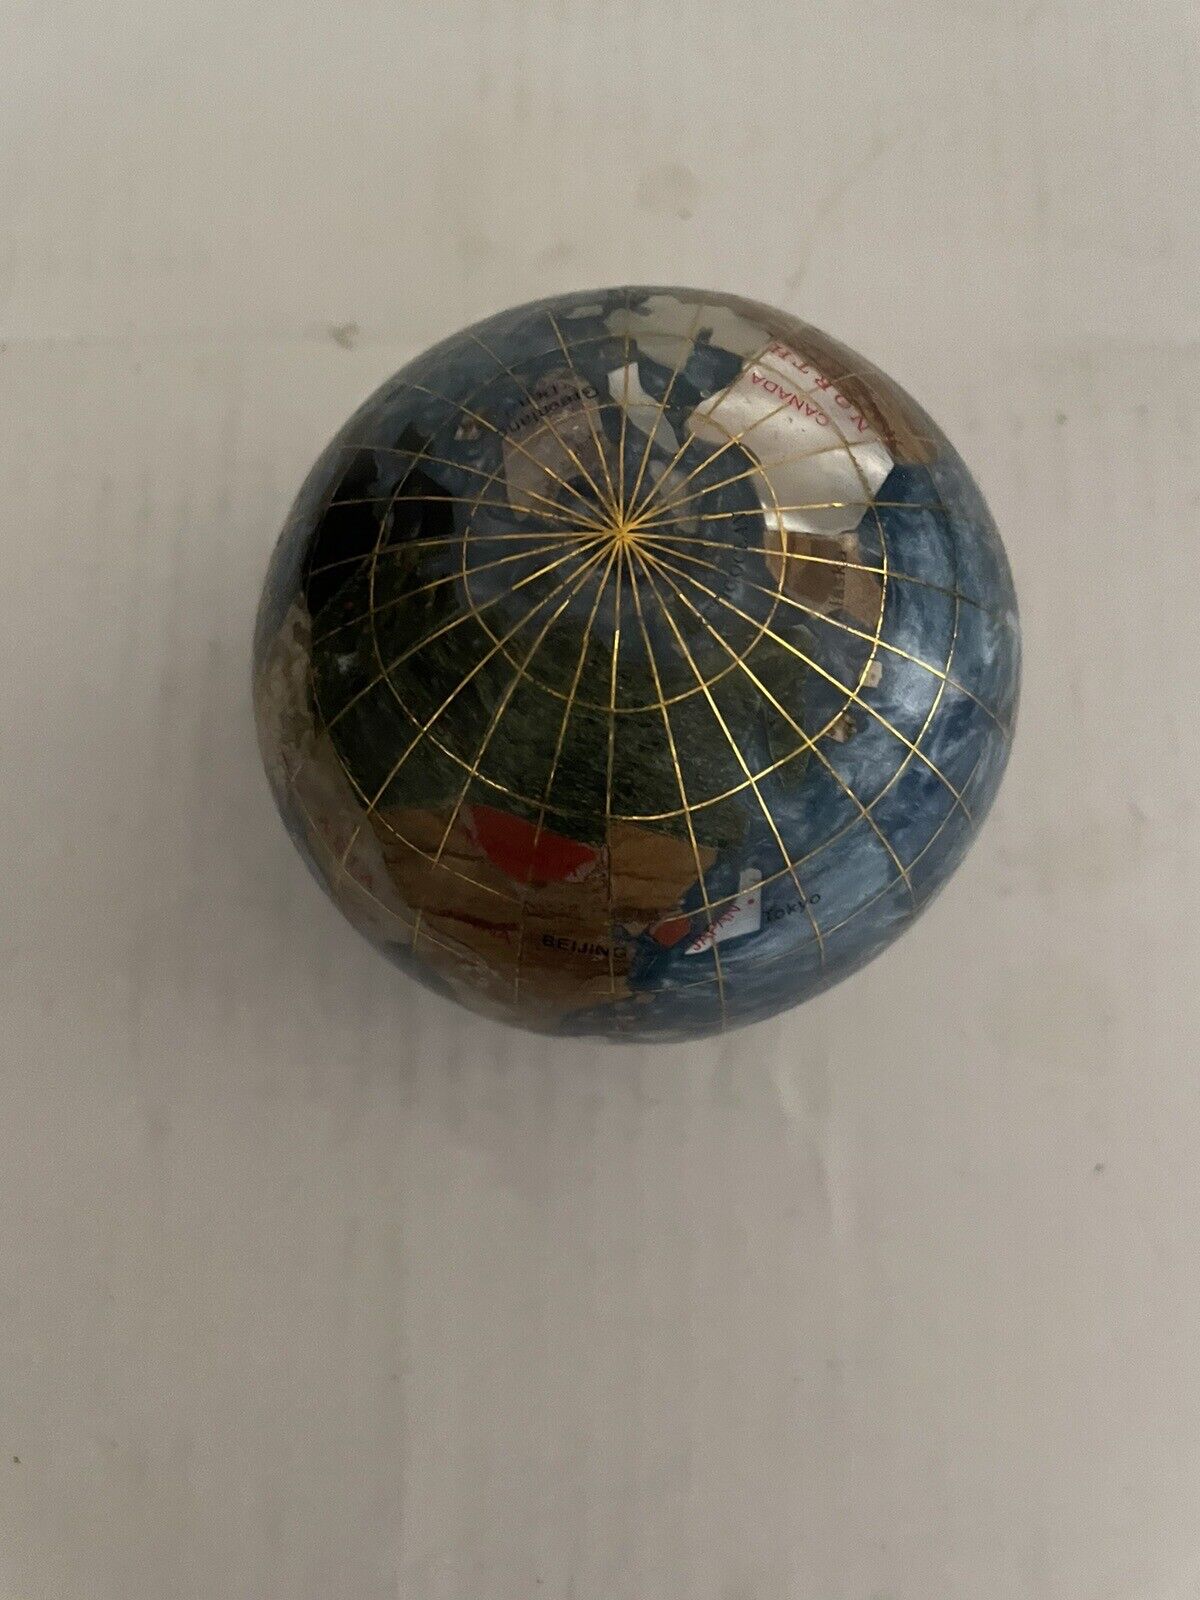 Vintage Globe Paperweight Totally Made Out Of Different Semiprecious Stones